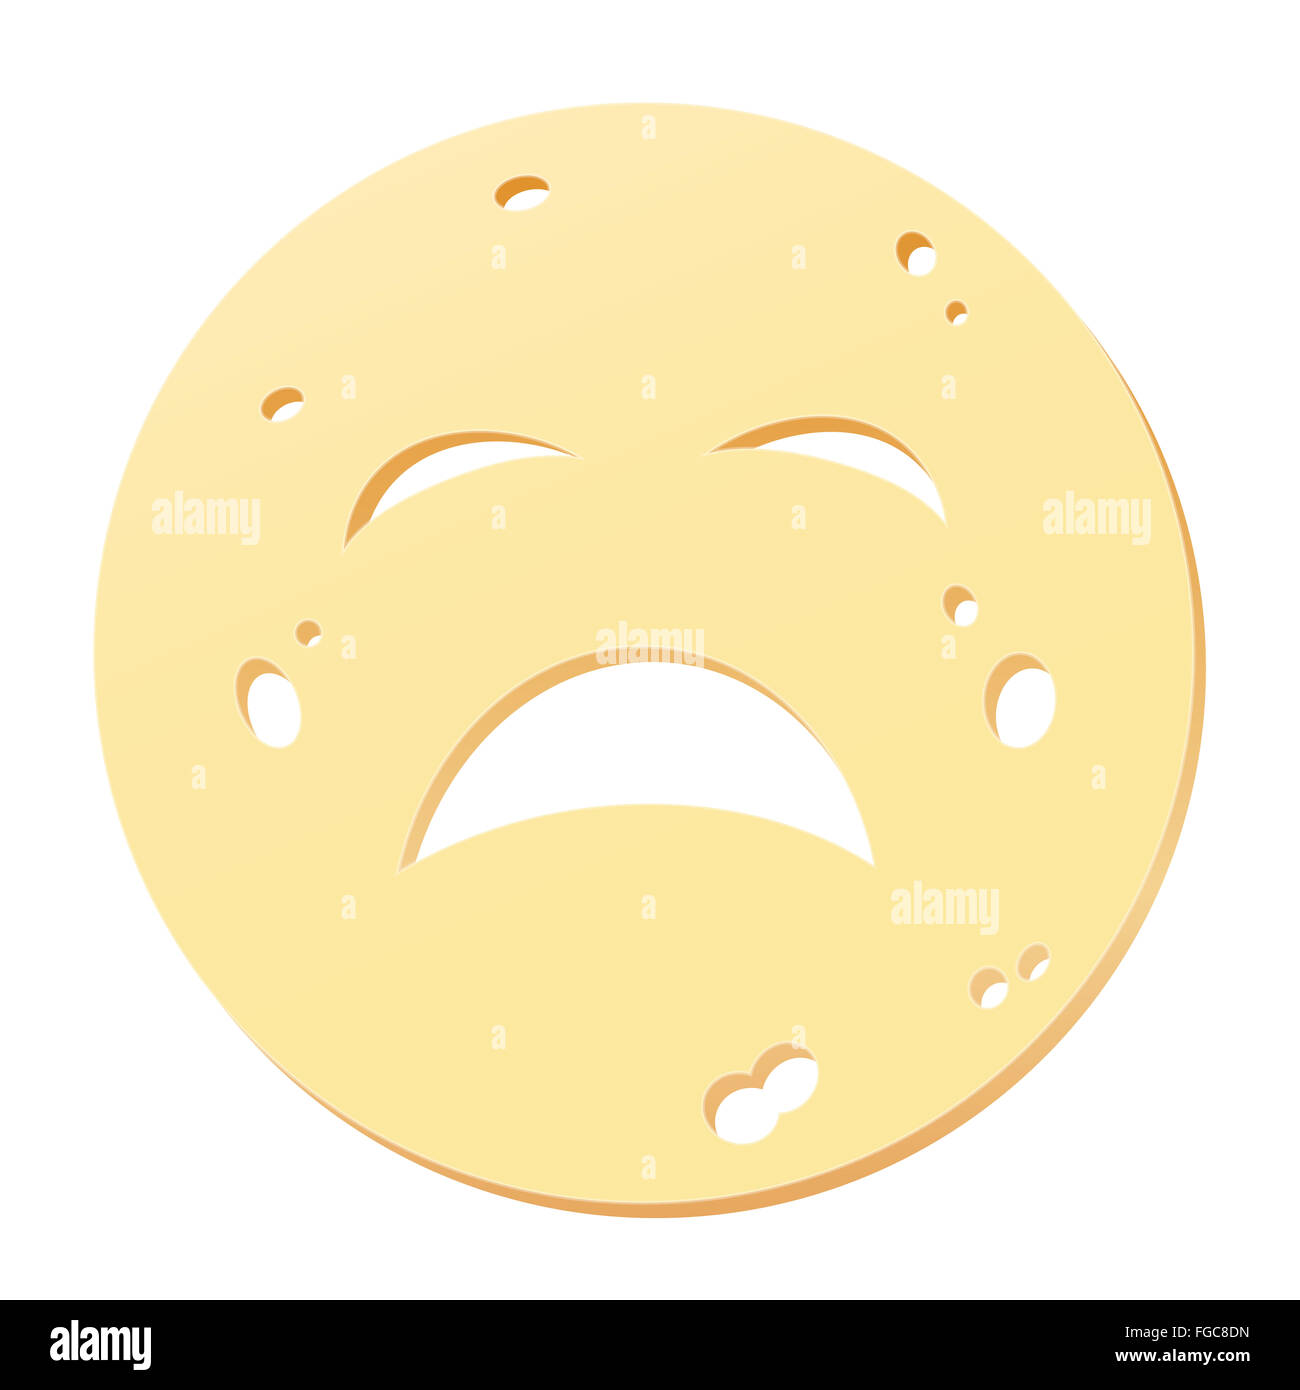 Cheese slice with unhappy face - symbol for unhealthy, noxious, allergenic or stale nutrition. Stock Photo